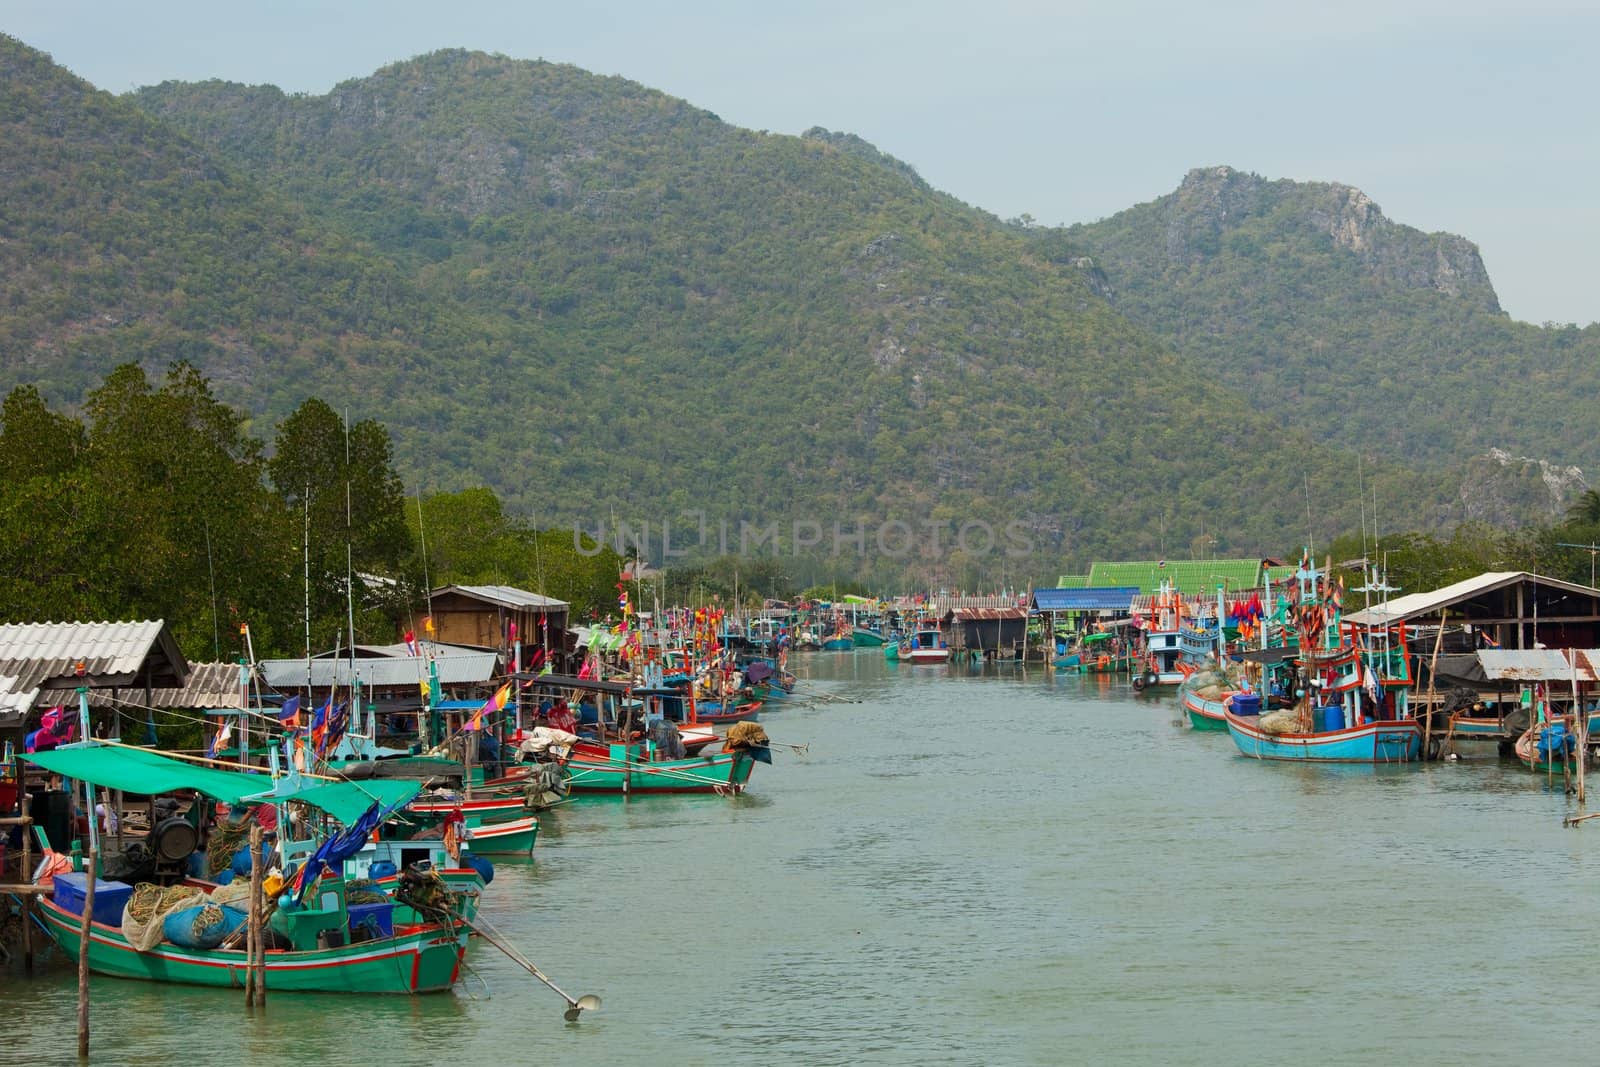 scene of fishing boats at a port in Thailand